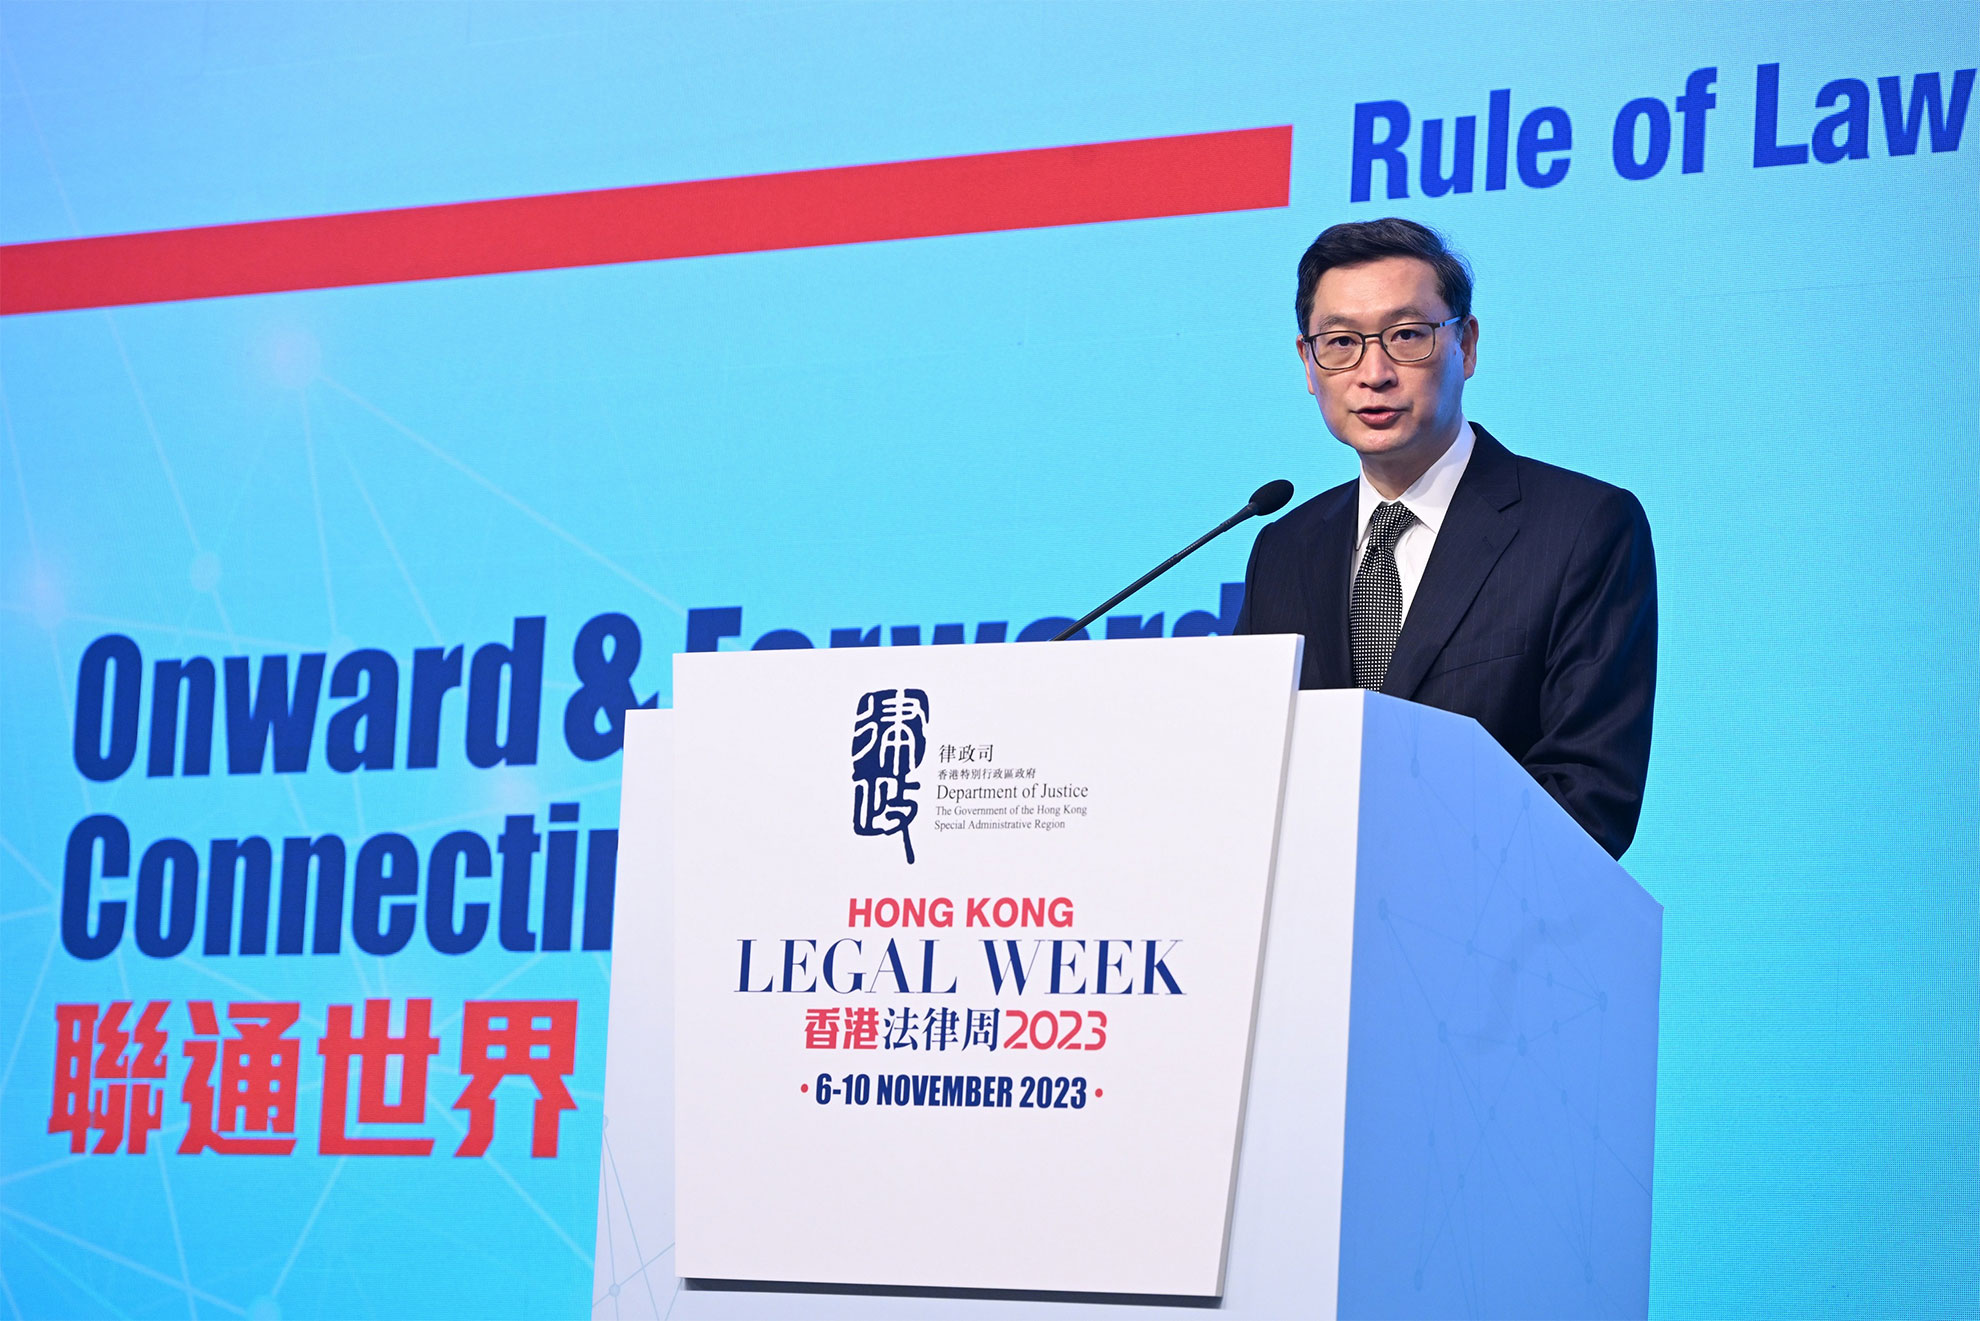 The Chief Judge of the High Court, Mr Justice Jeremy Poon Shiu-chor, speaks at Hong Kong Legal Week 2023: Rule of Law for the Future this morning (November 10).